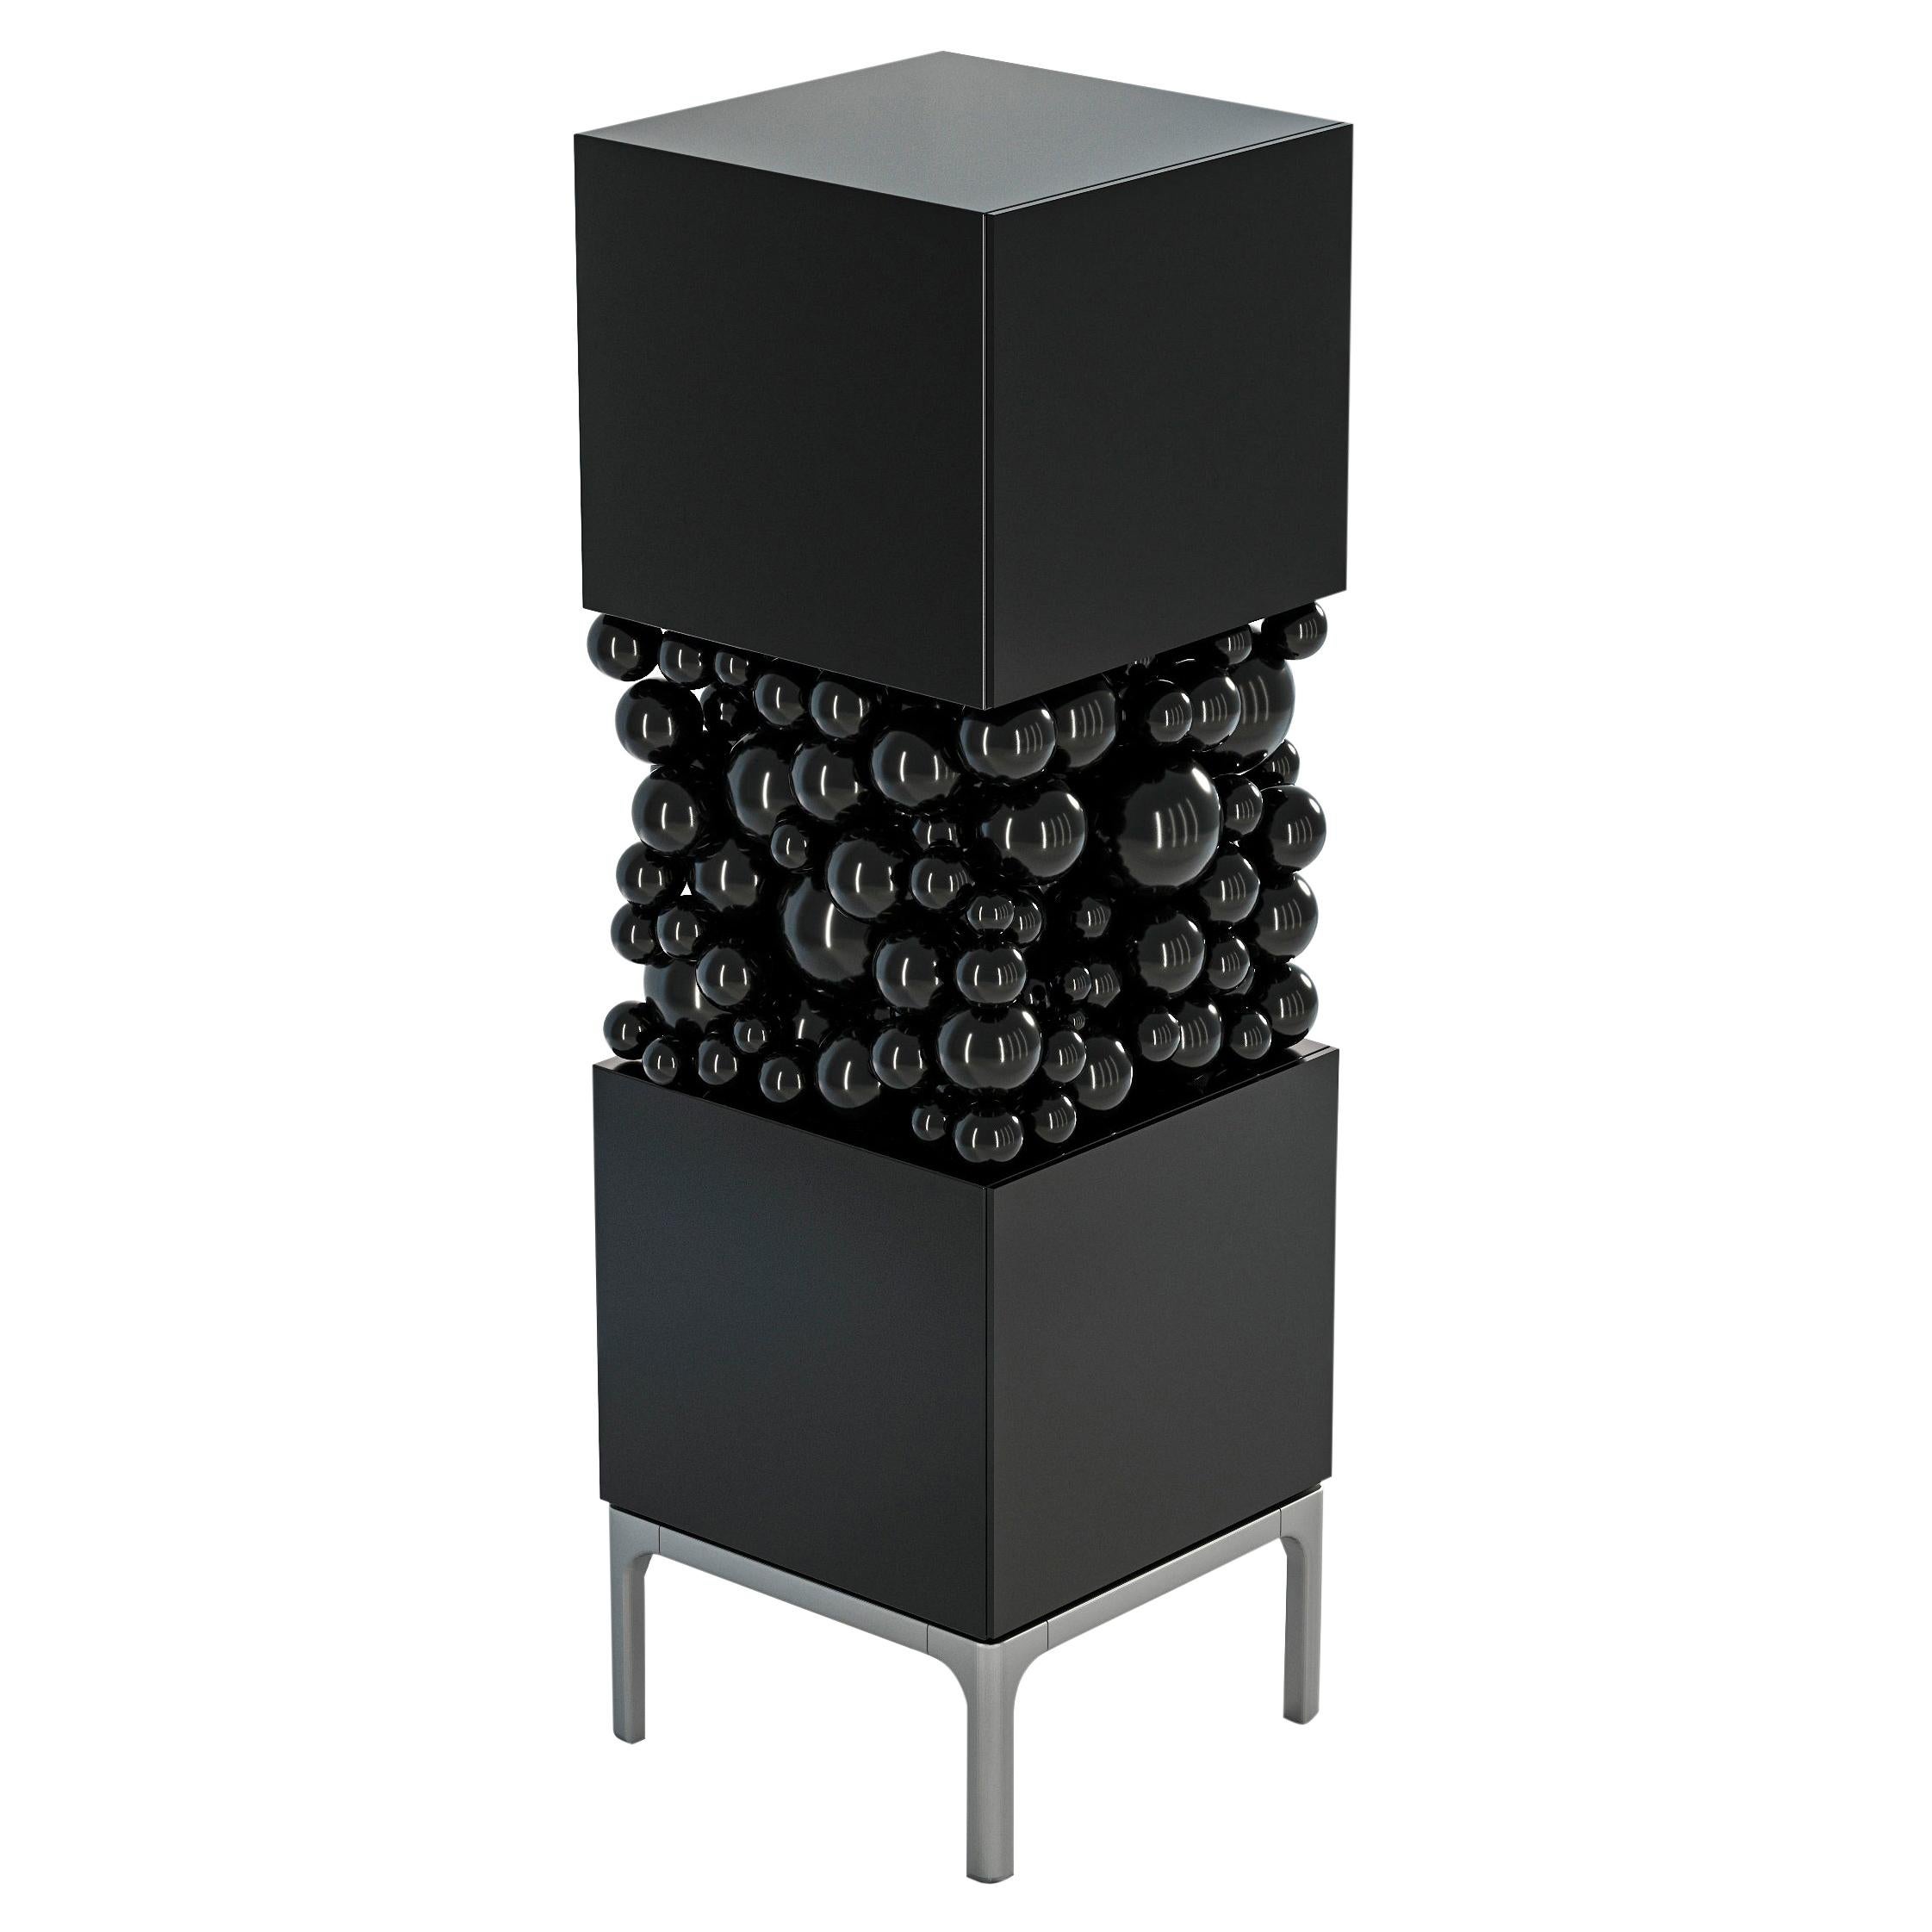 Metal and Plywood Black Cabinet, Bubbles Collection, Amazing Emotional Design For Sale